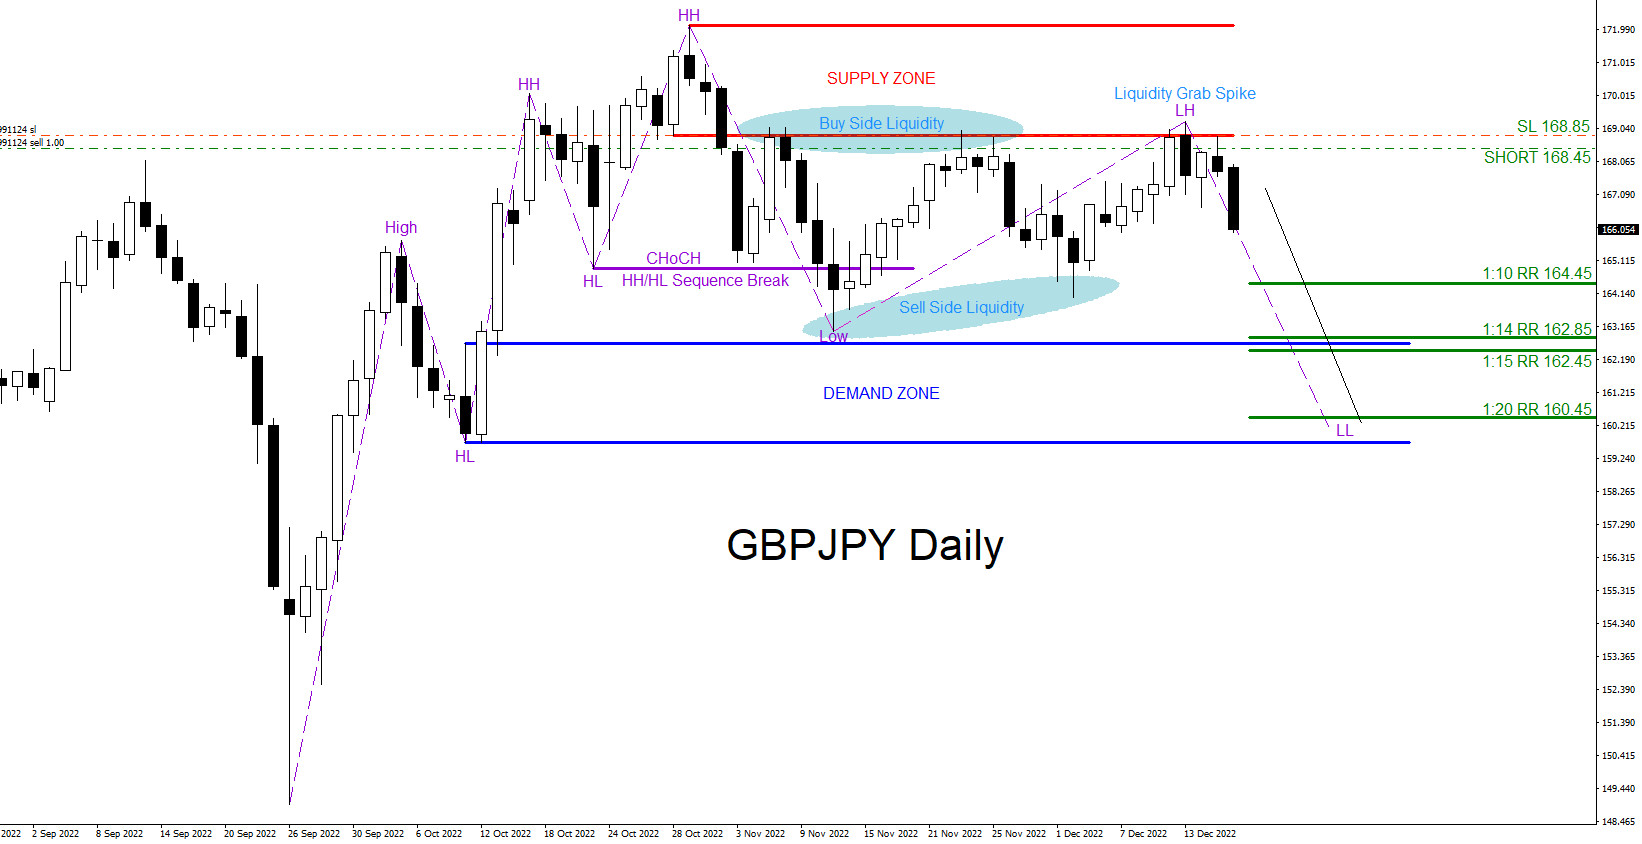 GBPJPY : Catching the 800 Pip 1:20 Risk/Reward Move Lower